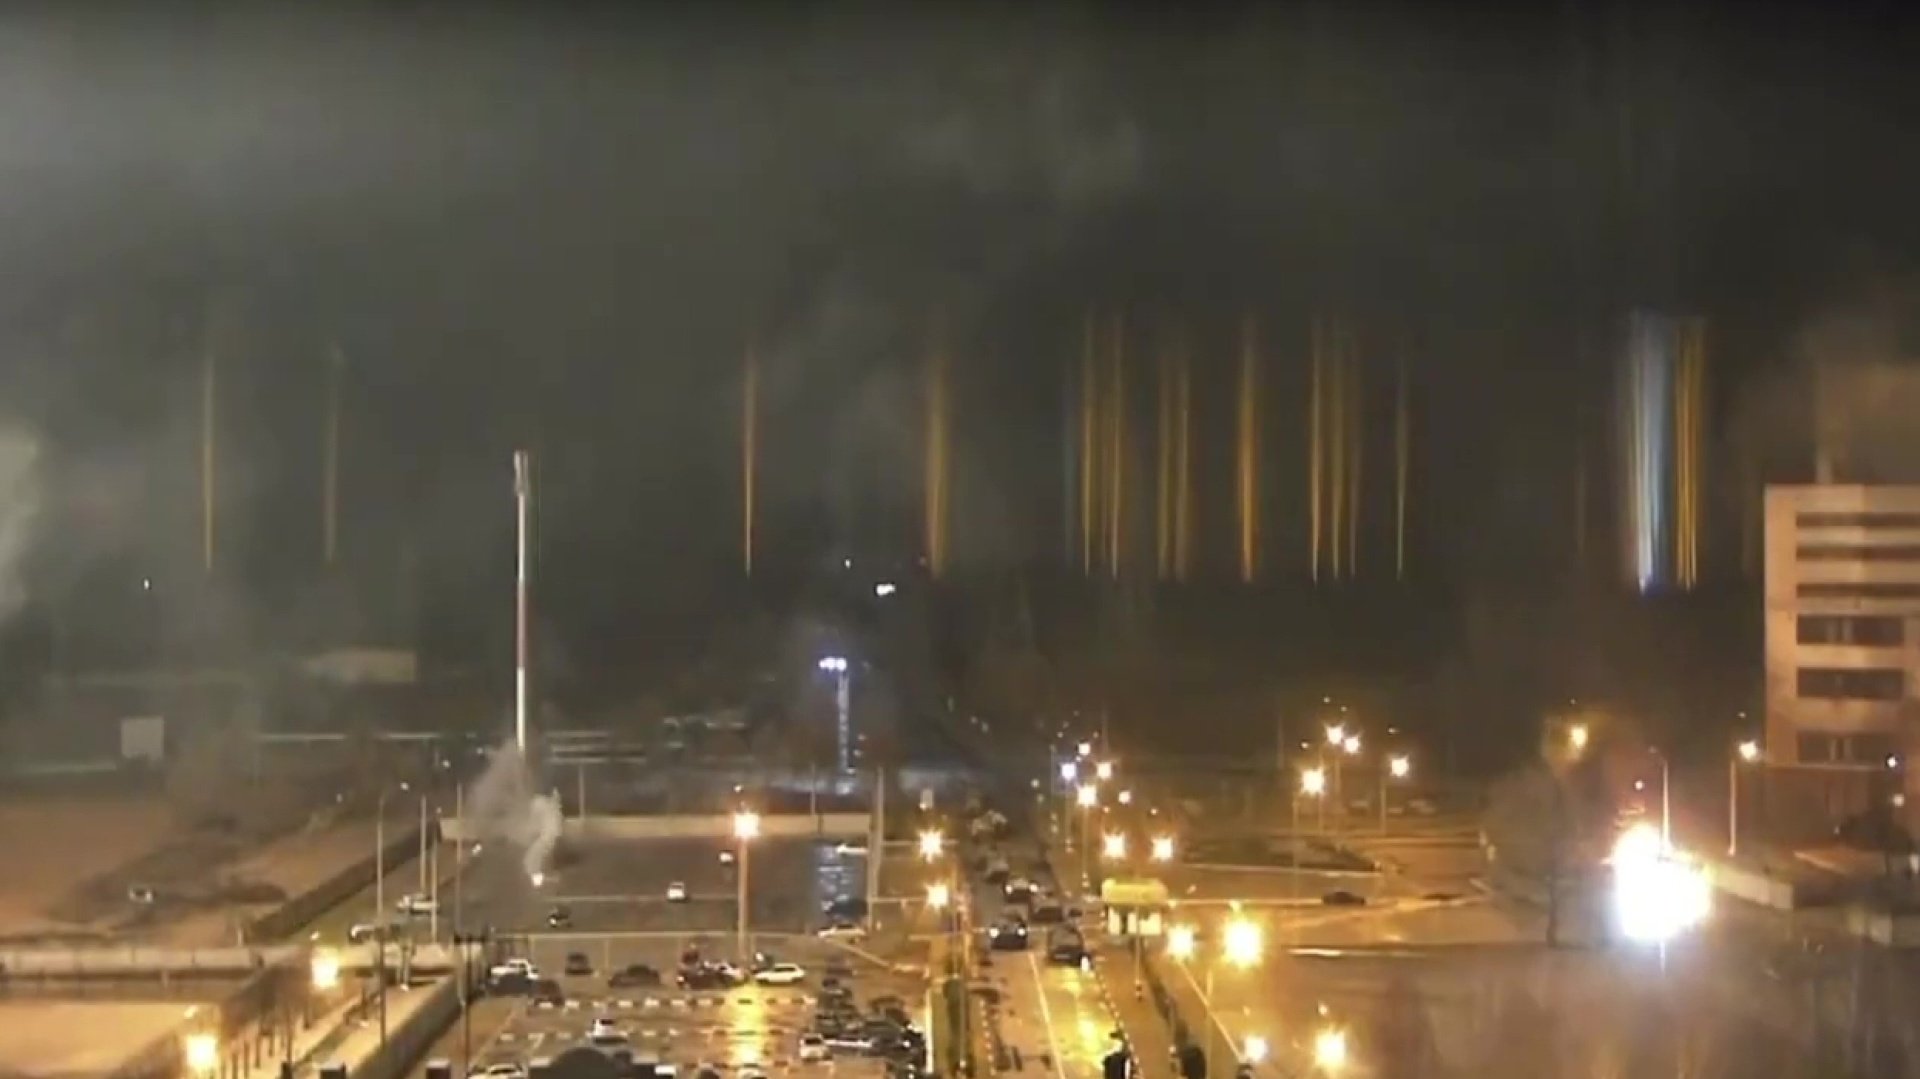 Fire breaks out at site of Zaporizhzhia nuclear power plant in Ukraine